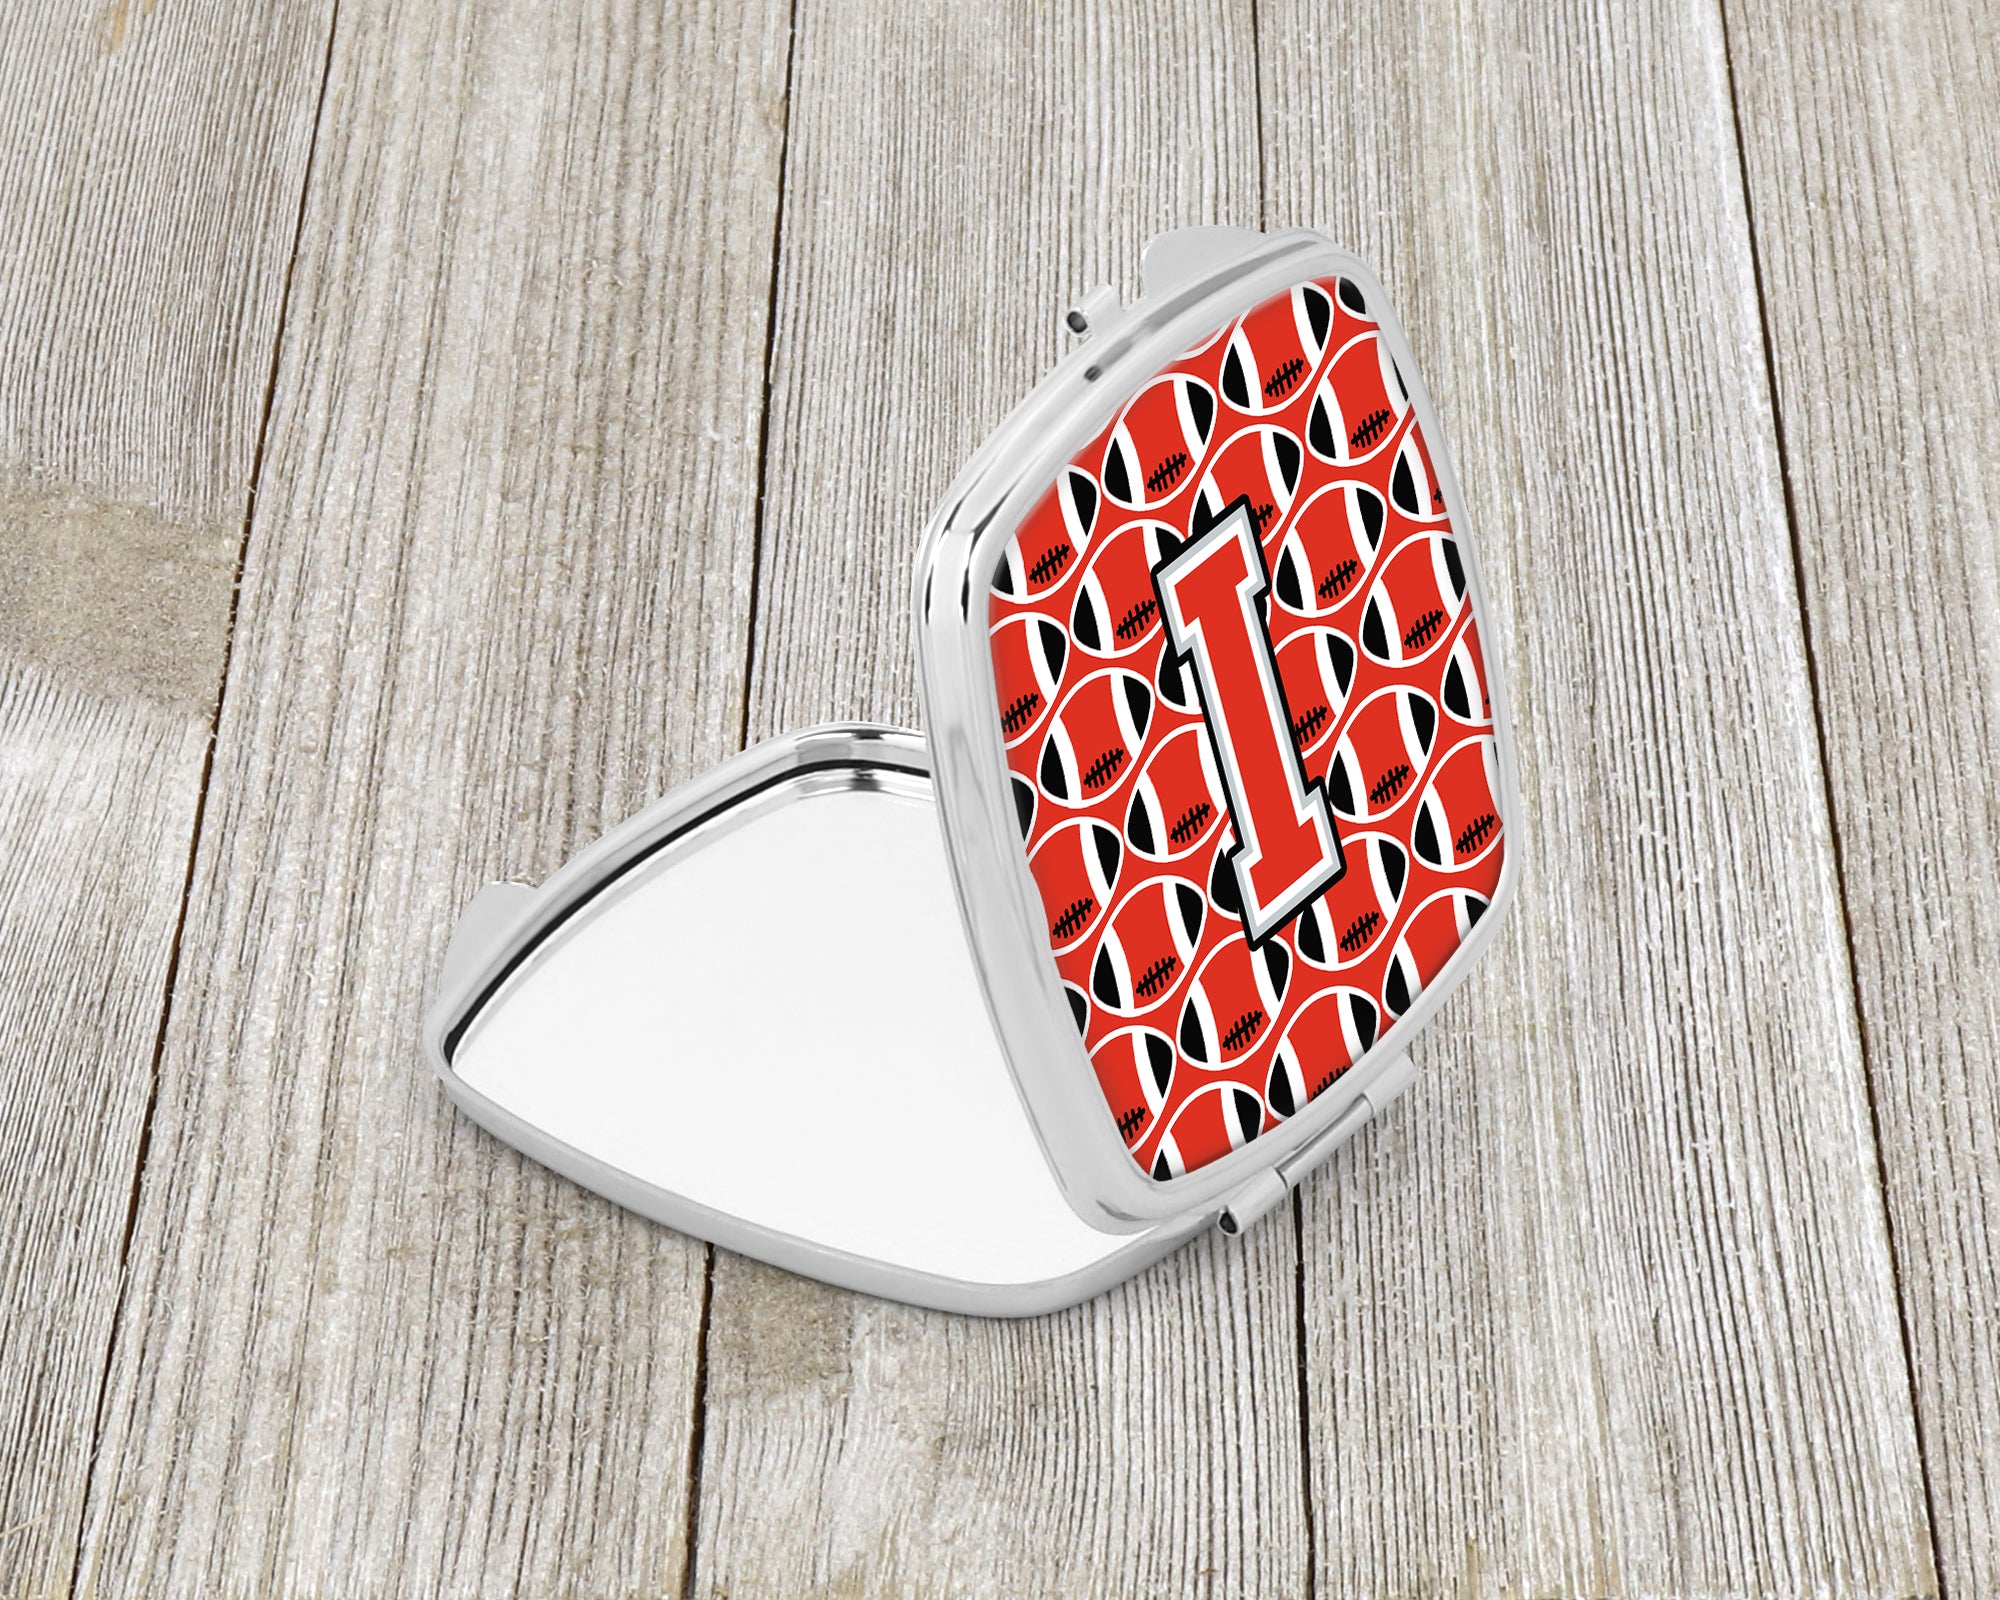 Letter I Football Scarlet and Grey Compact Mirror CJ1067-ISCM